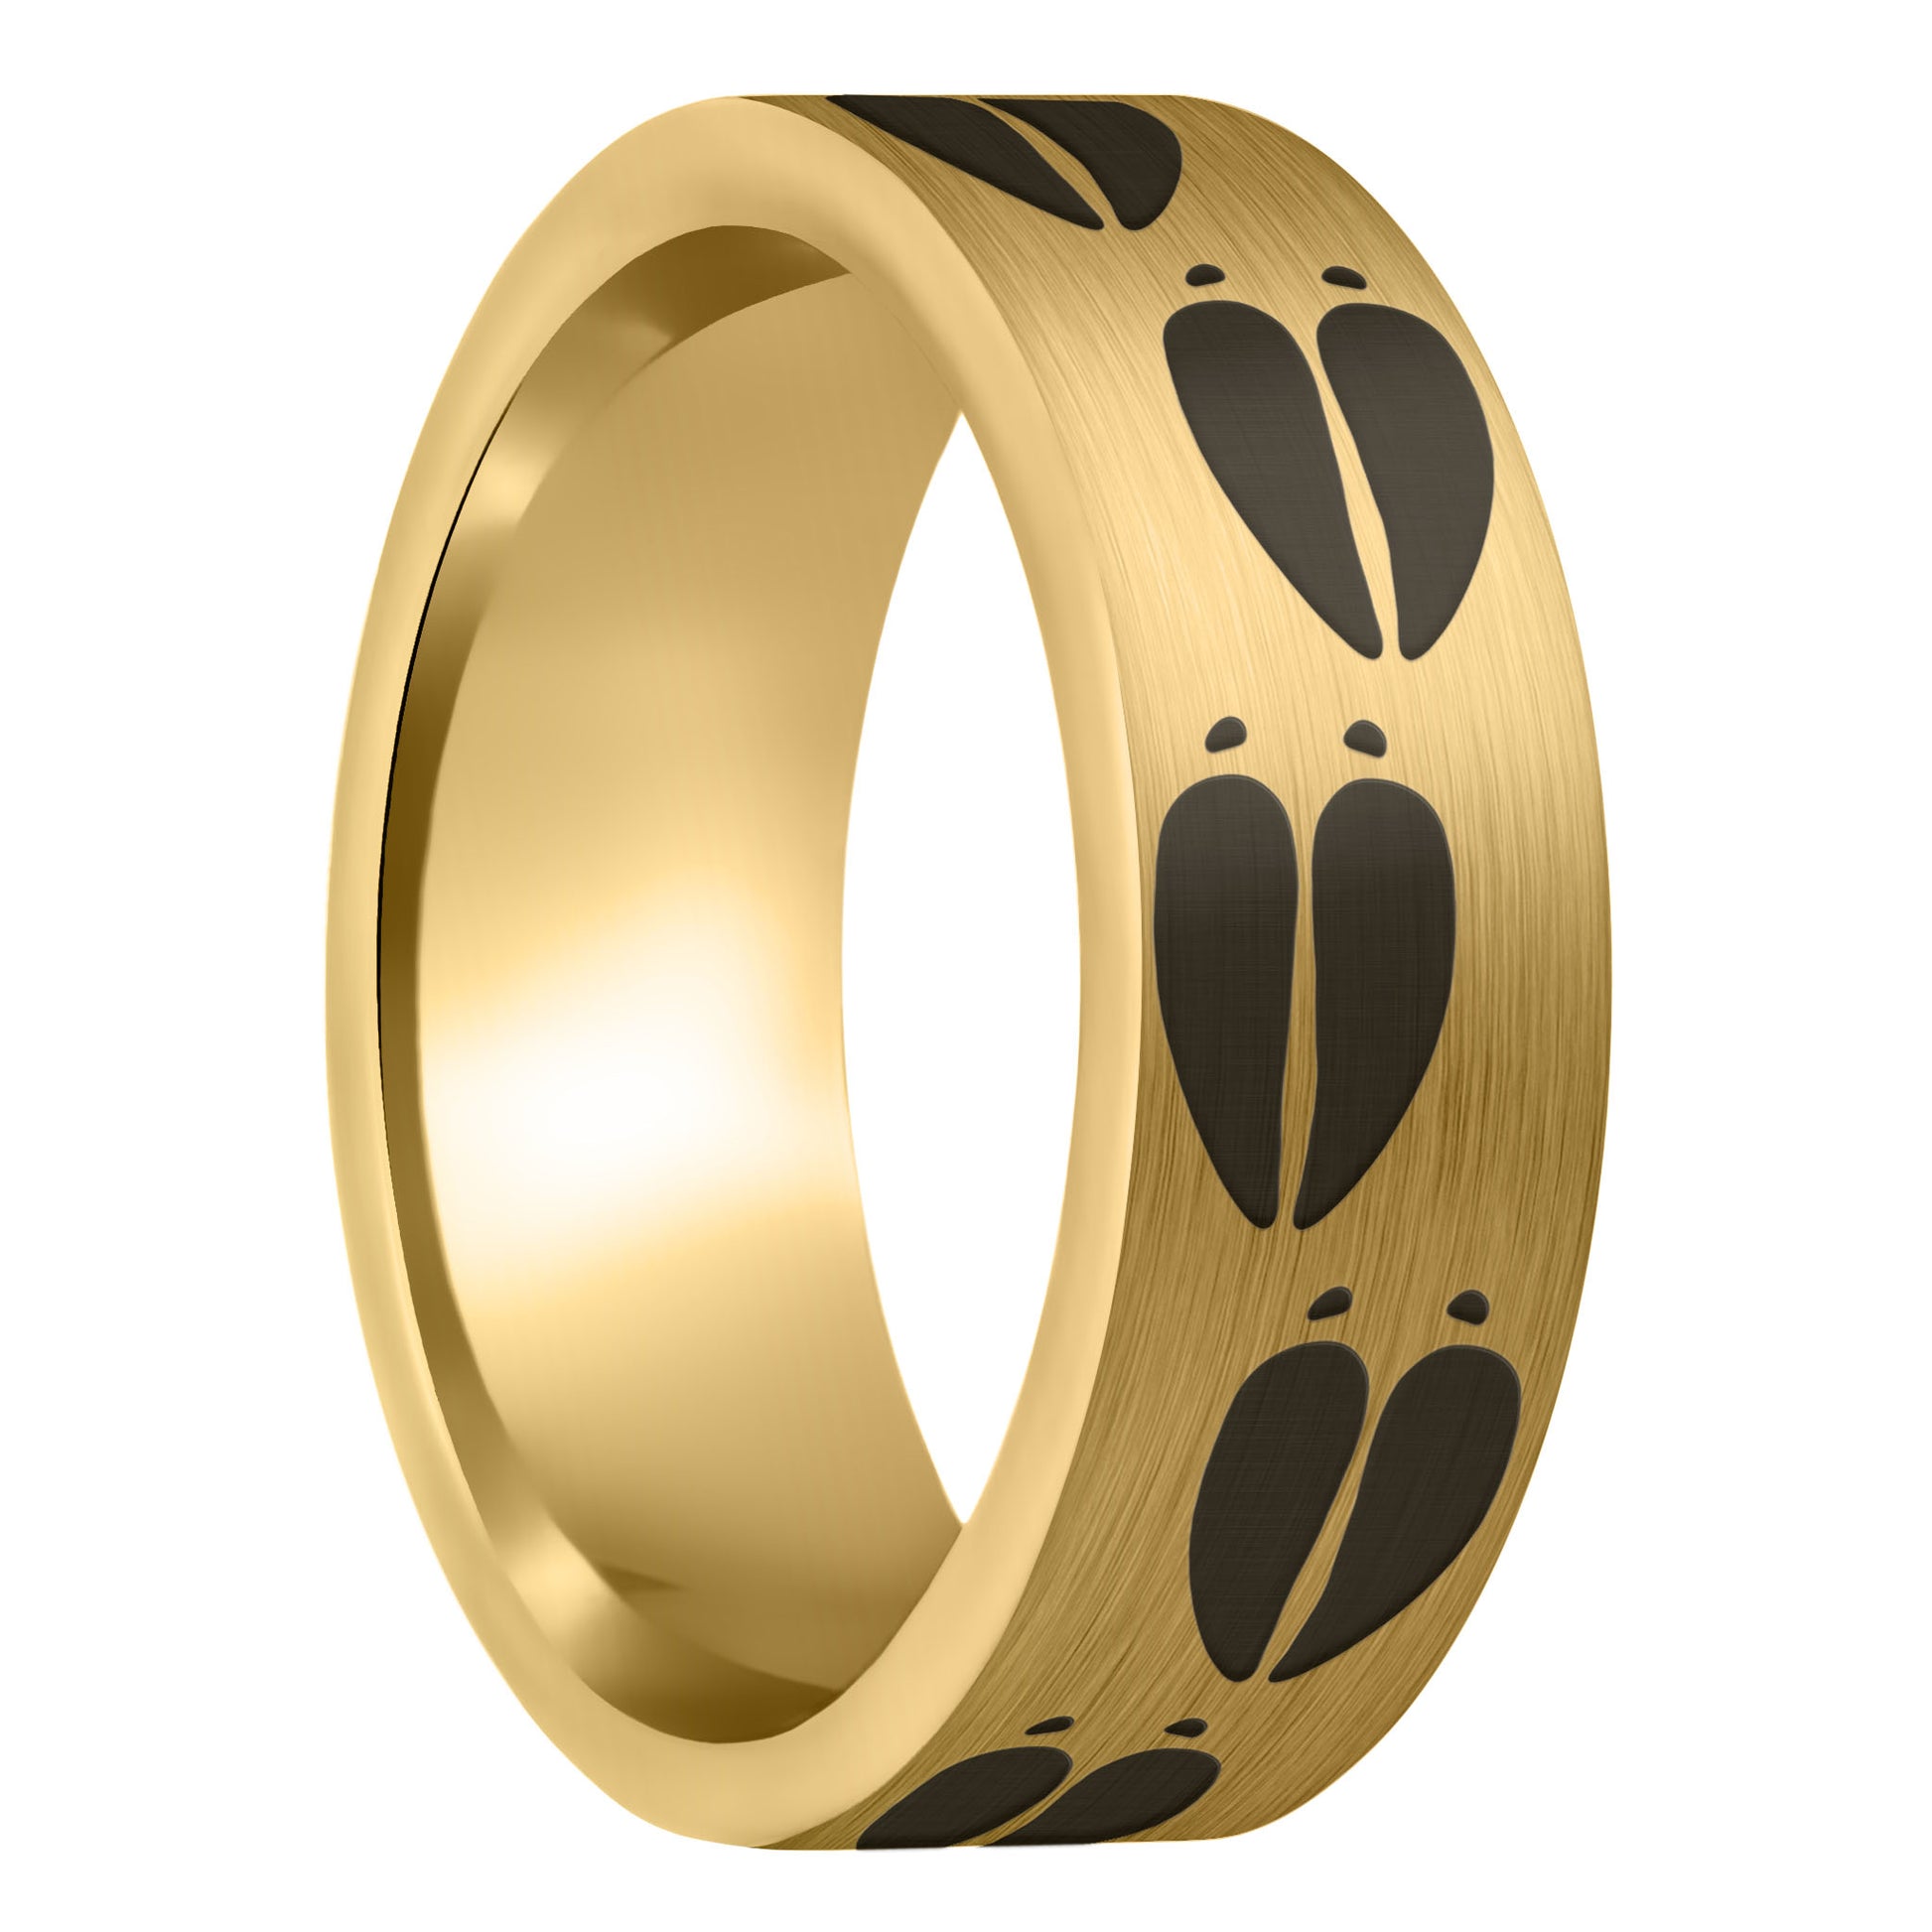 A moose tracks brushed gold tungsten men's wedding band displayed on a plain white background.